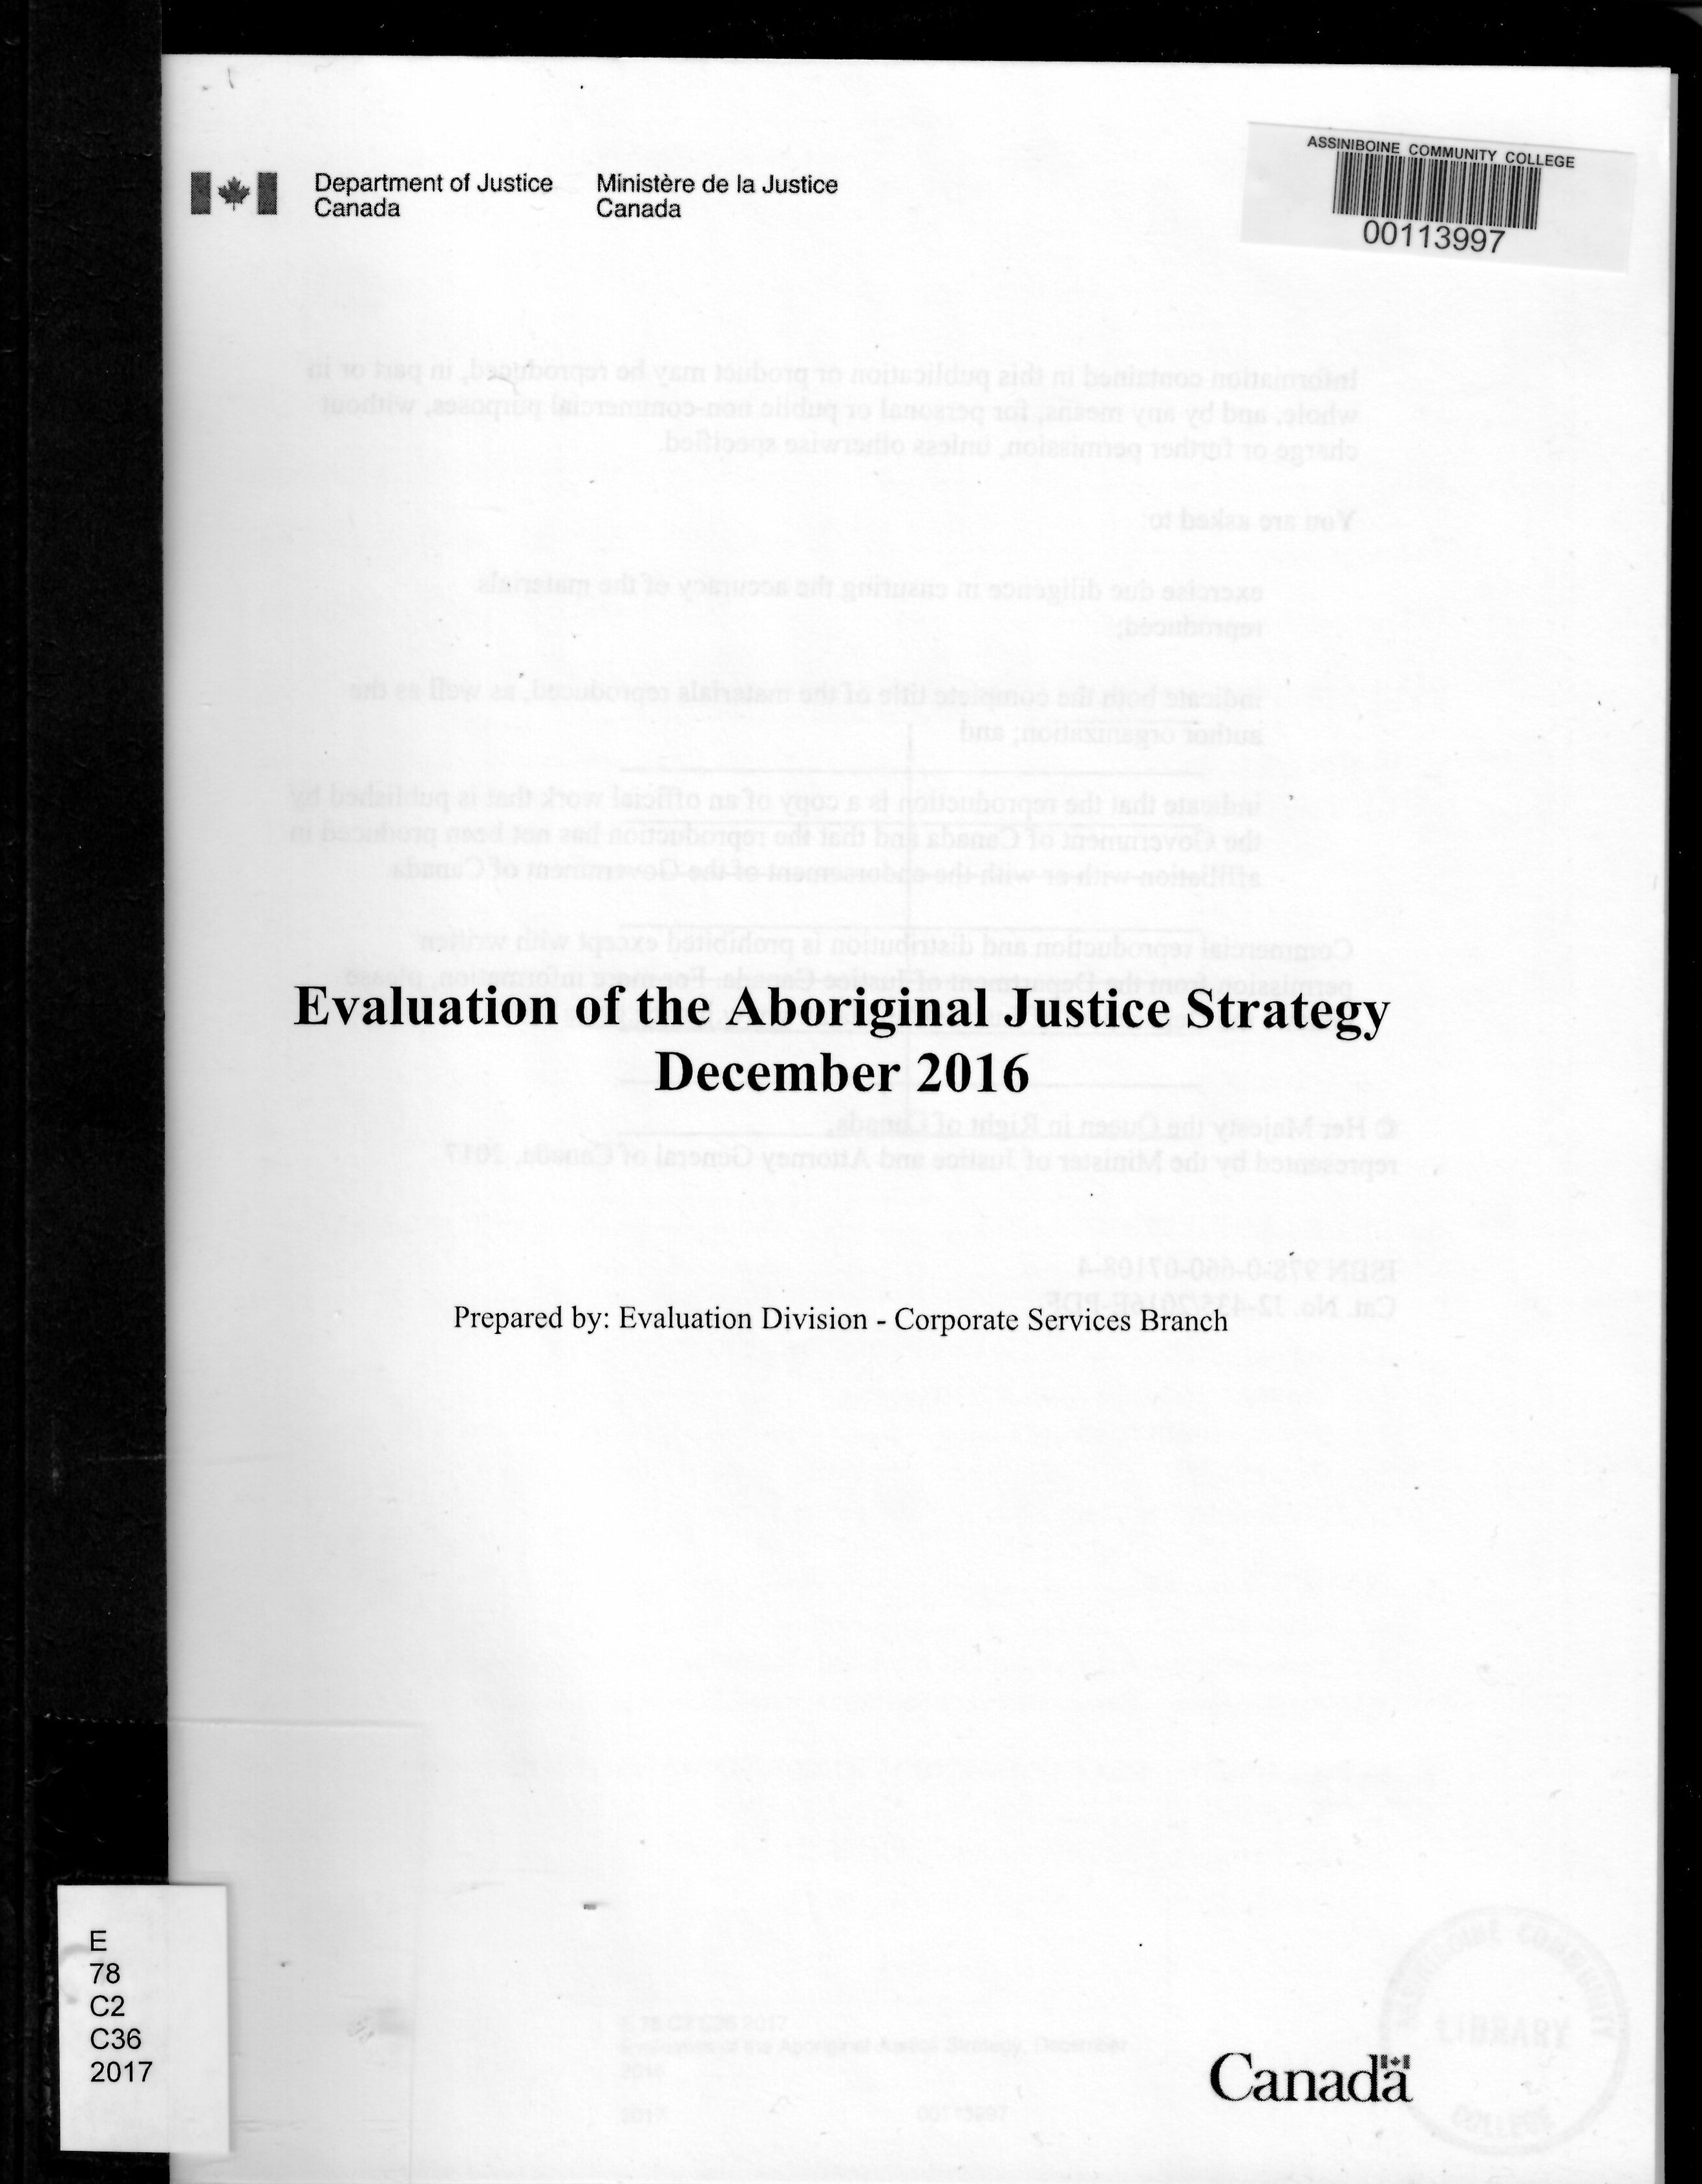 Evaluation of the Aboriginal Justice Strategy, December 2016